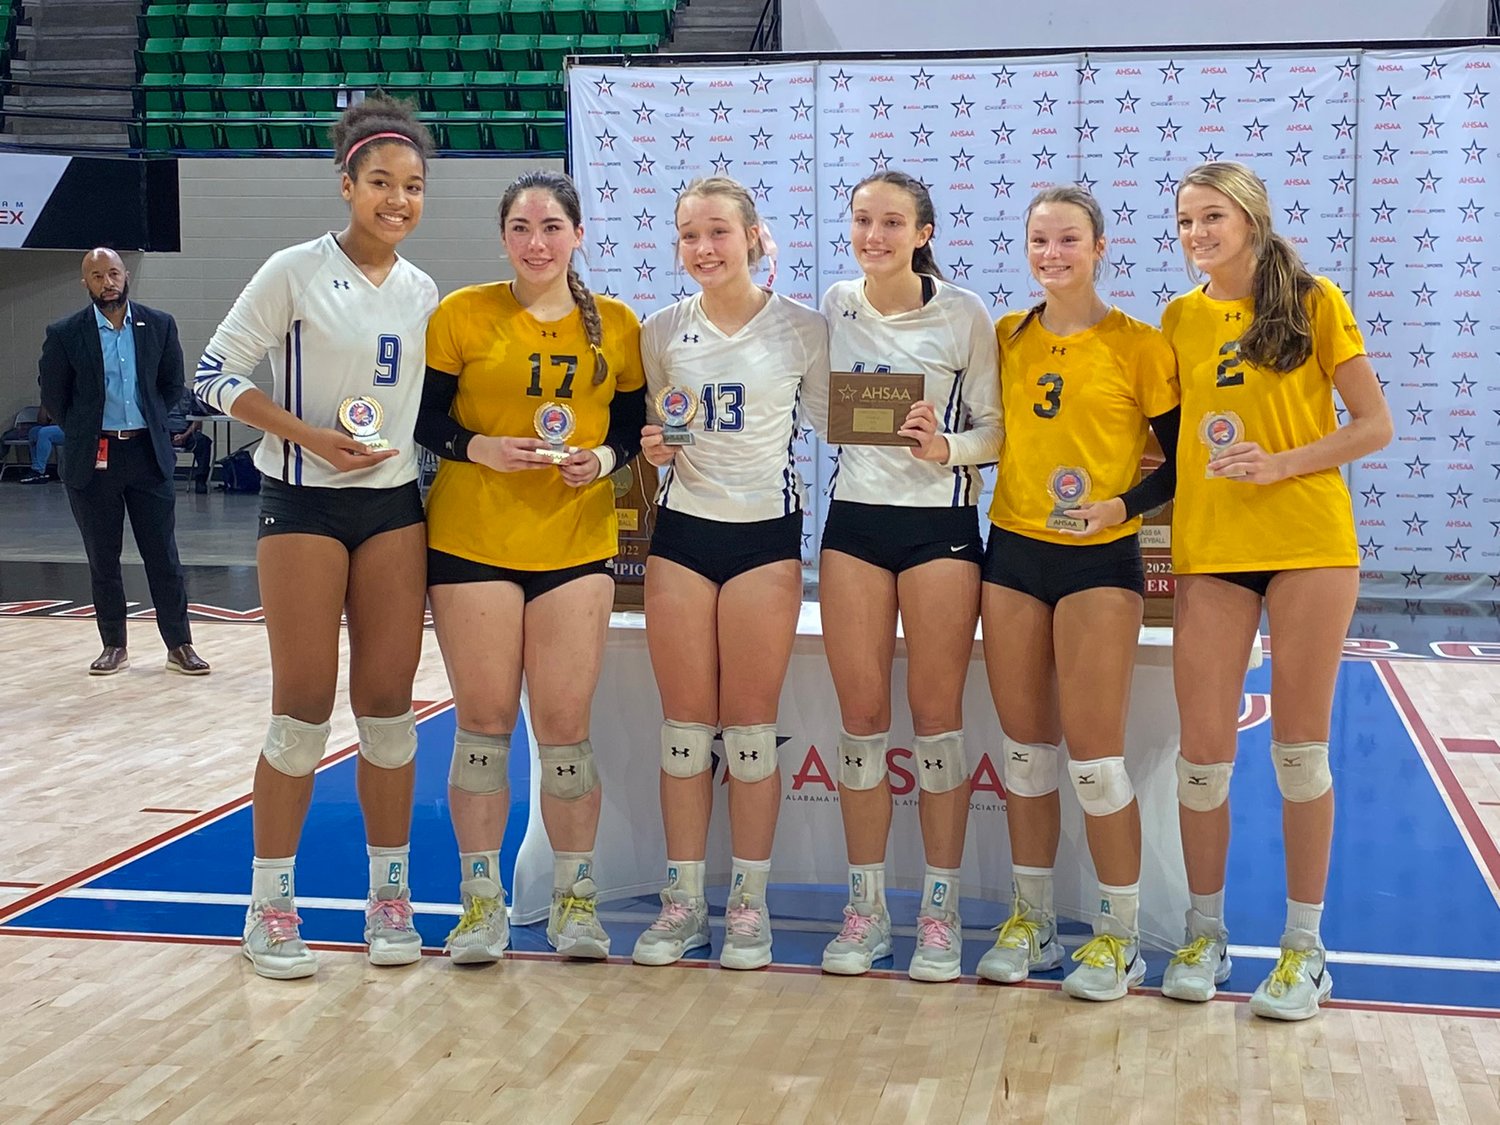 The Class 6A All-State Tournament team included Haley Robinson, Alexis Belarmino, Misty Kate Smith, Blakeley Robbins (MVP), Reese Varden and Bailey Hope.